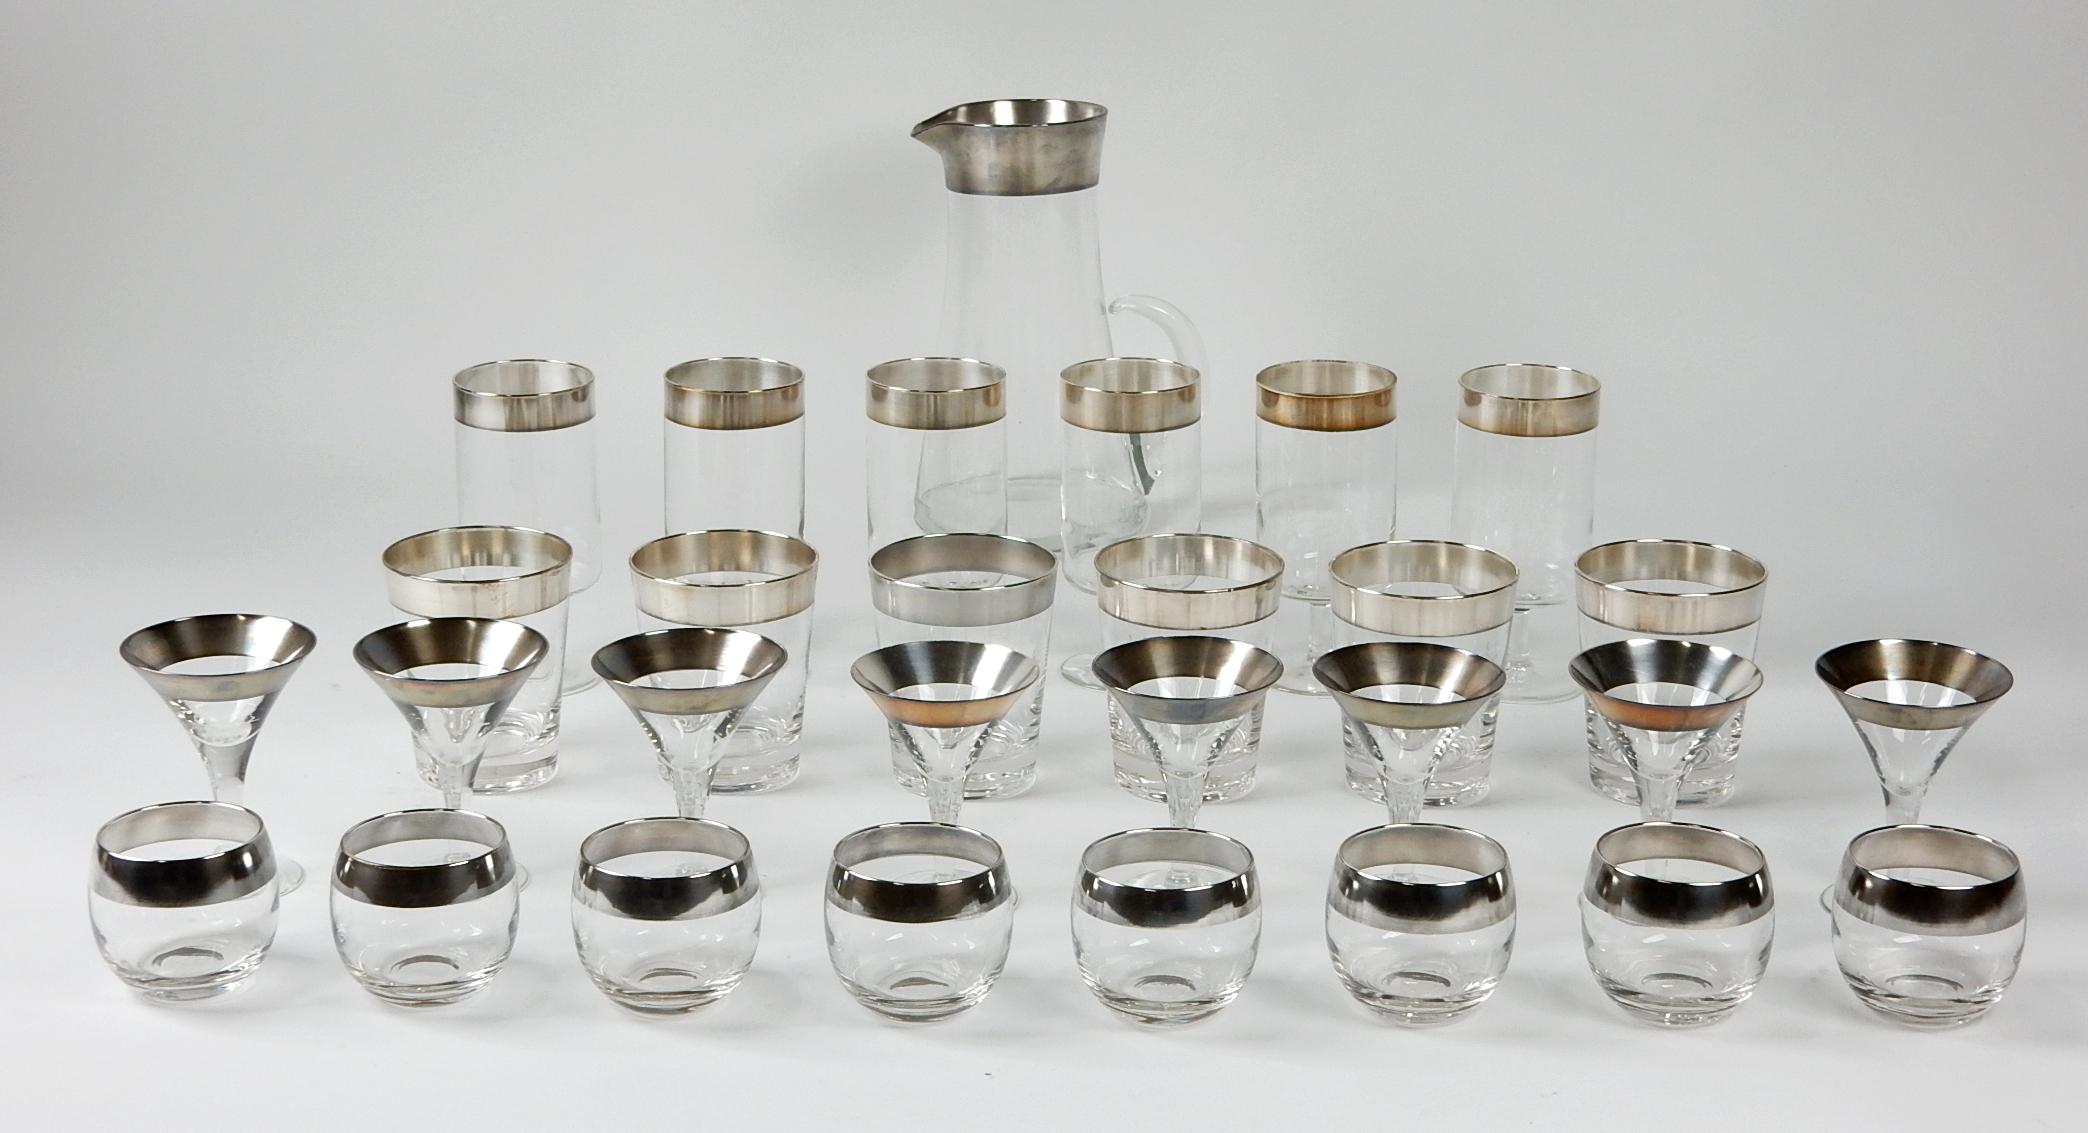 Instant collection from designer Dorothy Thorpe, circa 1950s. 
This rare set has the pure 1